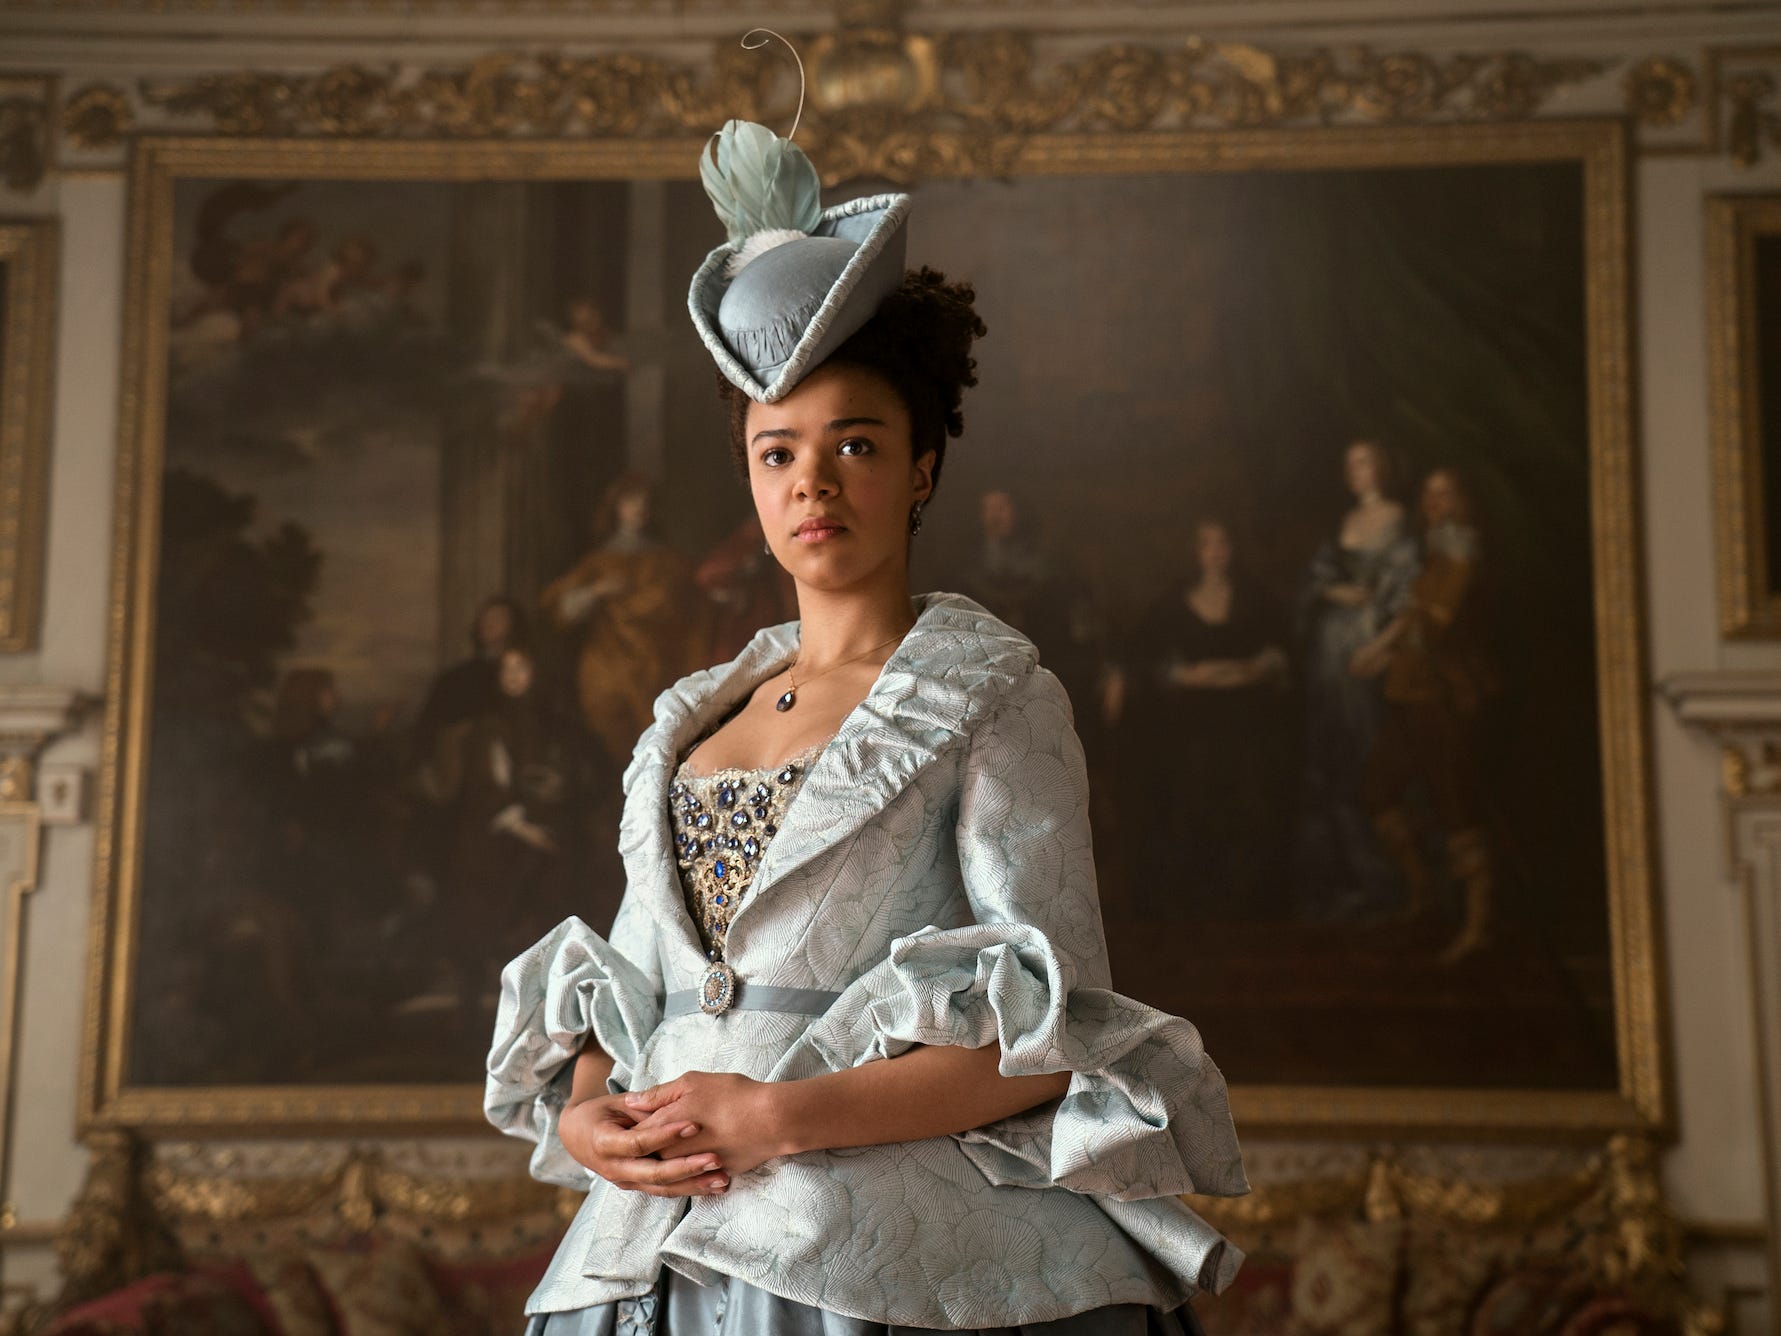 <ul class="summary-list"><li>"Queen Charlotte: A Bridgerton Story" is a spinoff of Netflix's hit show "Bridgerton."</li><li>If you want another complicated but sweet love story, watch "Outlander" or "Normal People."</li><li>Check out "Dickinson" and "The Buccaneers" if you're craving a modern period drama.</li></ul><p><a href="https://www.insider.com/queen-charlotte-details-easter-eggs-missed-bridgerton-spinoff-2023-5">"Queen Charlotte: A Bridgerton Story"</a> is a prequel series about the fan-favorite monarch from Netflix's hit <a href="https://www.insider.com/queen-charlotte-bridgerton-references-easter-eggs-details-main-show-2023-5">"Bridgerton"</a> series.</p><p>The story takes fans back in time to follow a <a href="https://www.insider.com/queen-charlotte-a-bridgerton-story-adult-and-teenage-cast-photos-2023-3">young Queen Charlotte</a> as she is forced to marry the <a href="https://www.insider.com/queen-charlotte-a-bridgerton-story-real-ages-versus-characters-2023-5">king of England</a> and gets thrust into a culture she knows nothing about.</p><p>The show is unlikely to get a second season because it is a limited series, but here are nine similar shows to watch if you want more romance stories or period dramas.</p><div class="read-original">Read the original article on <a href="https://www.businessinsider.com/shows-like-queen-charlotte-a-bridgerton-story-period-dramas-romance-2023-12">Business Insider</a></div>